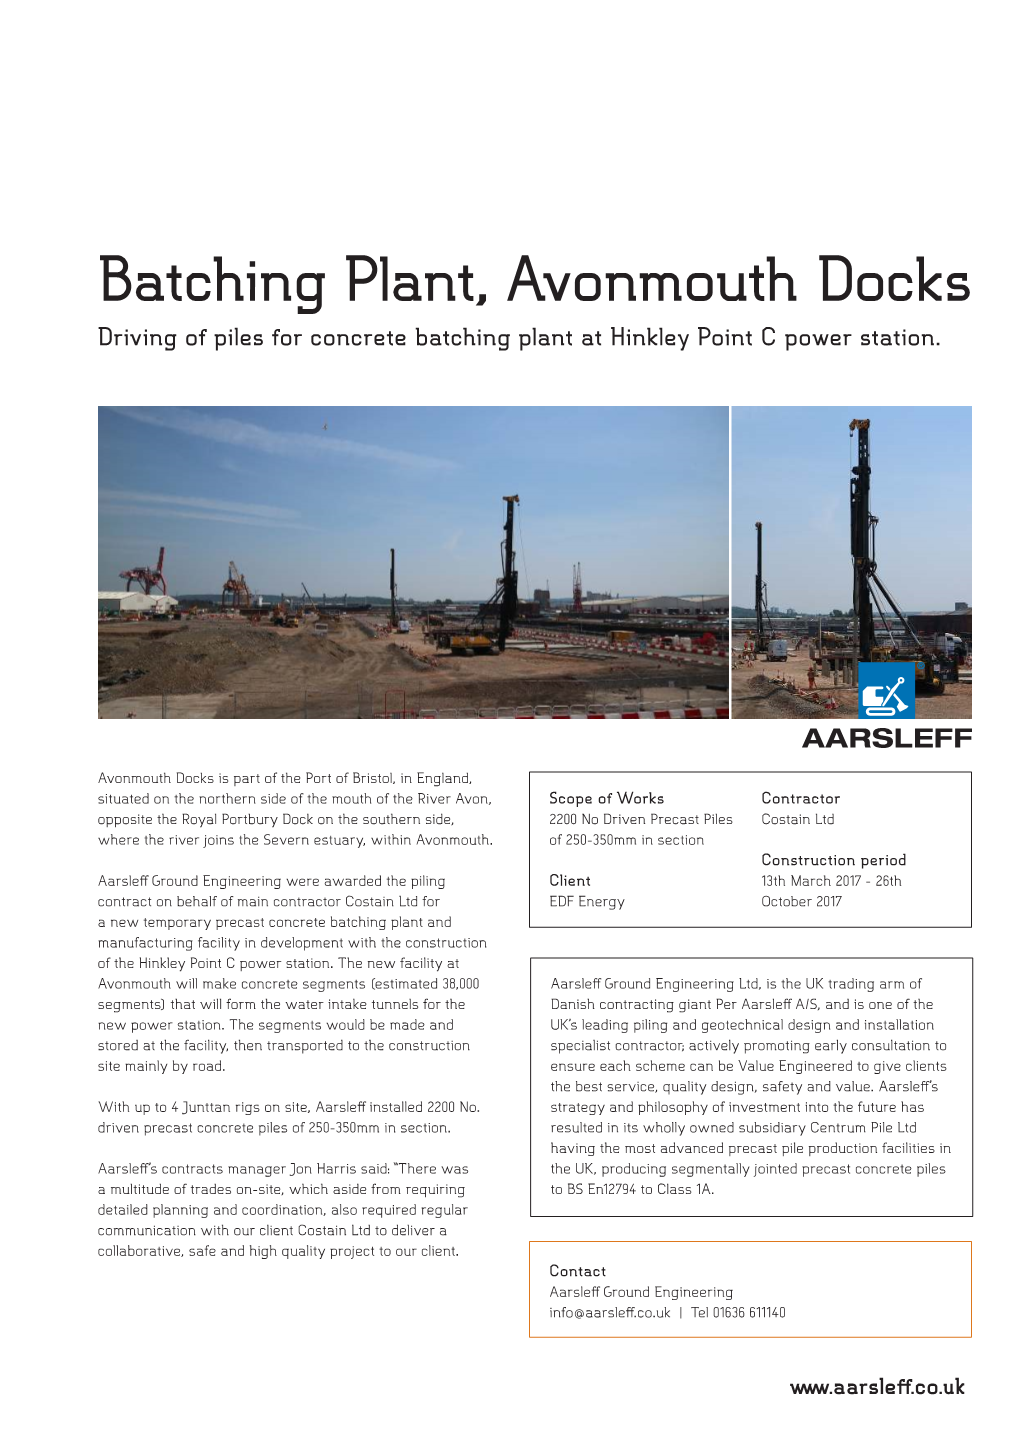 Batching Plant, Avonmouth Docks Driving of Piles for Concrete Batching Plant at Hinkley Point C Power Station